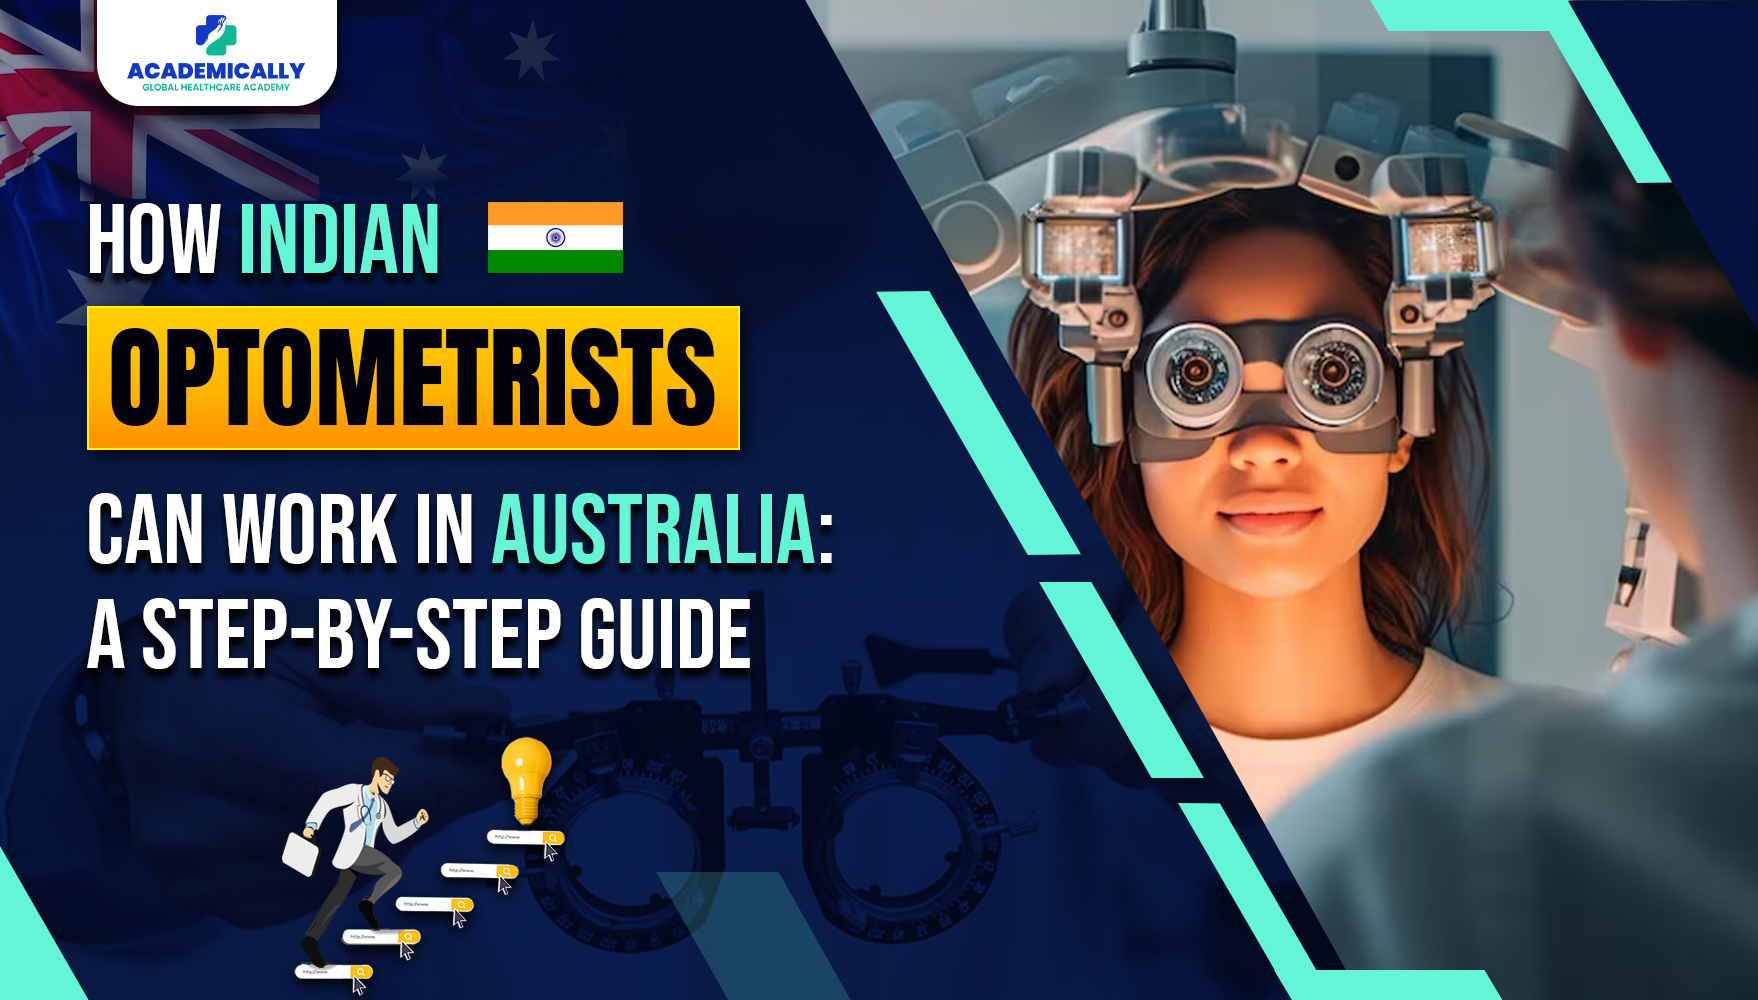 Guide for Optometrists Work In Australia